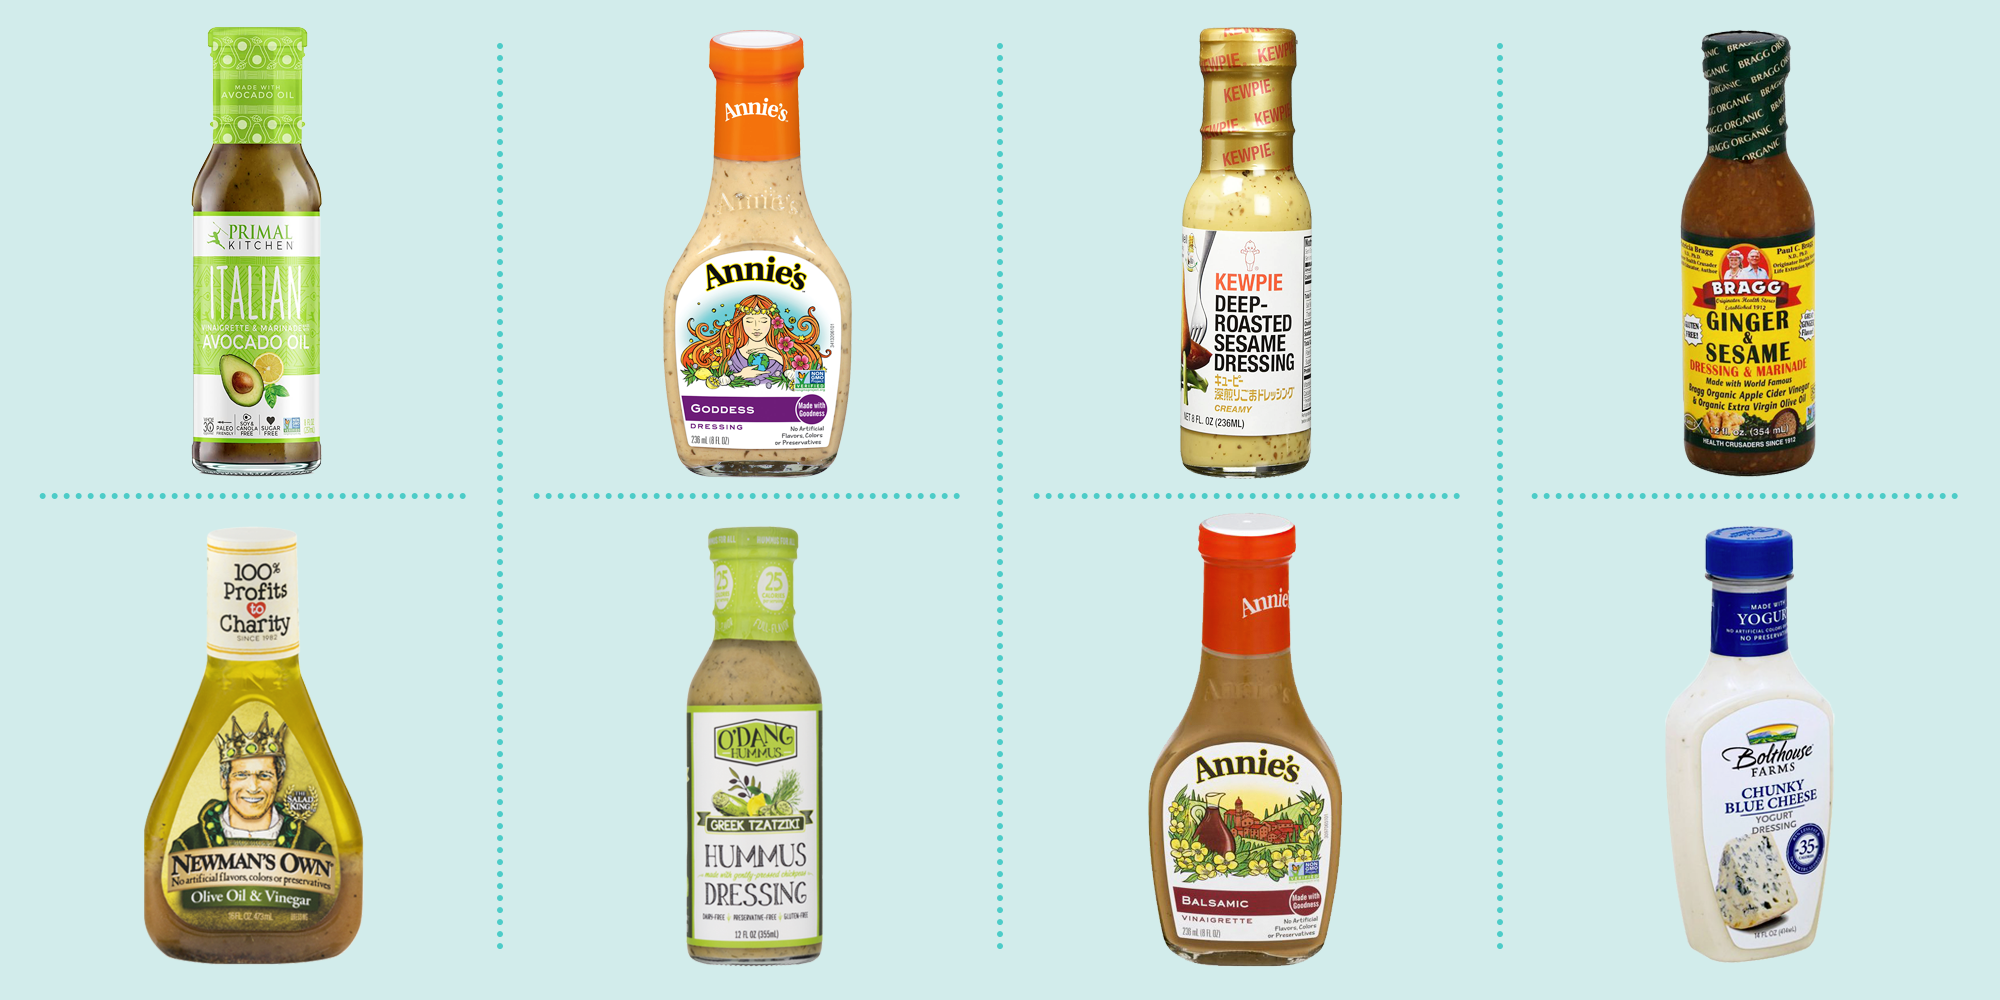 Best Green Goddess Dressing to Buy, According to Our Taste Test